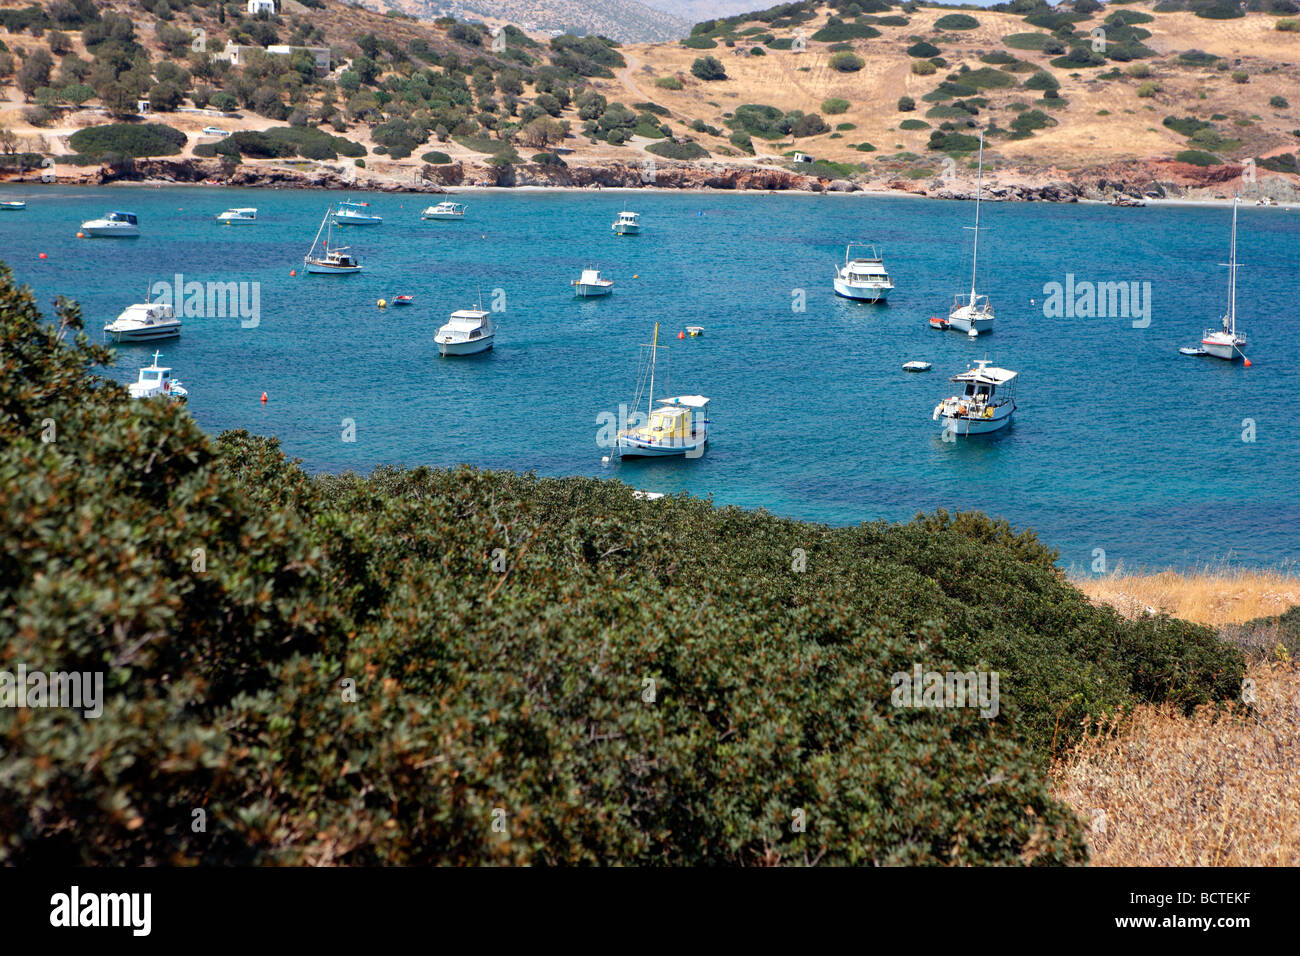 Yachts and motor boats moored in Greece Stock Photo